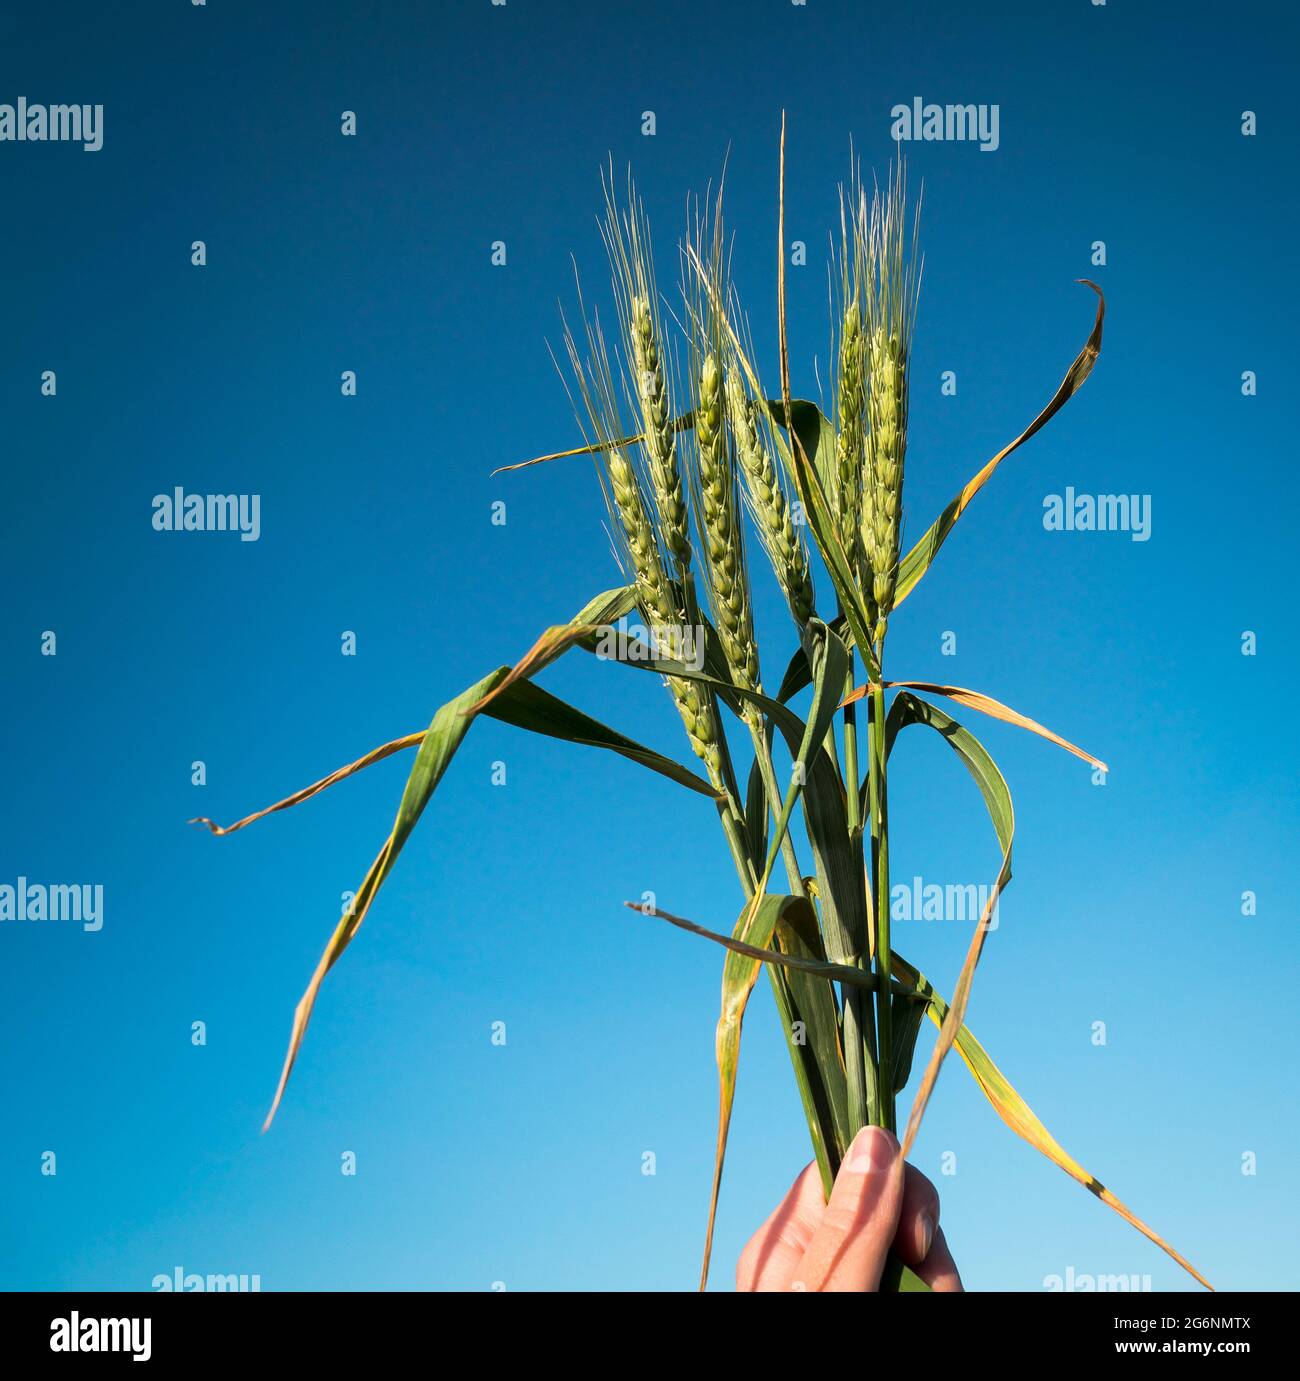 Green wheat ears in a hand for your stories of agriculture industry or agronomy work. Stock Photo